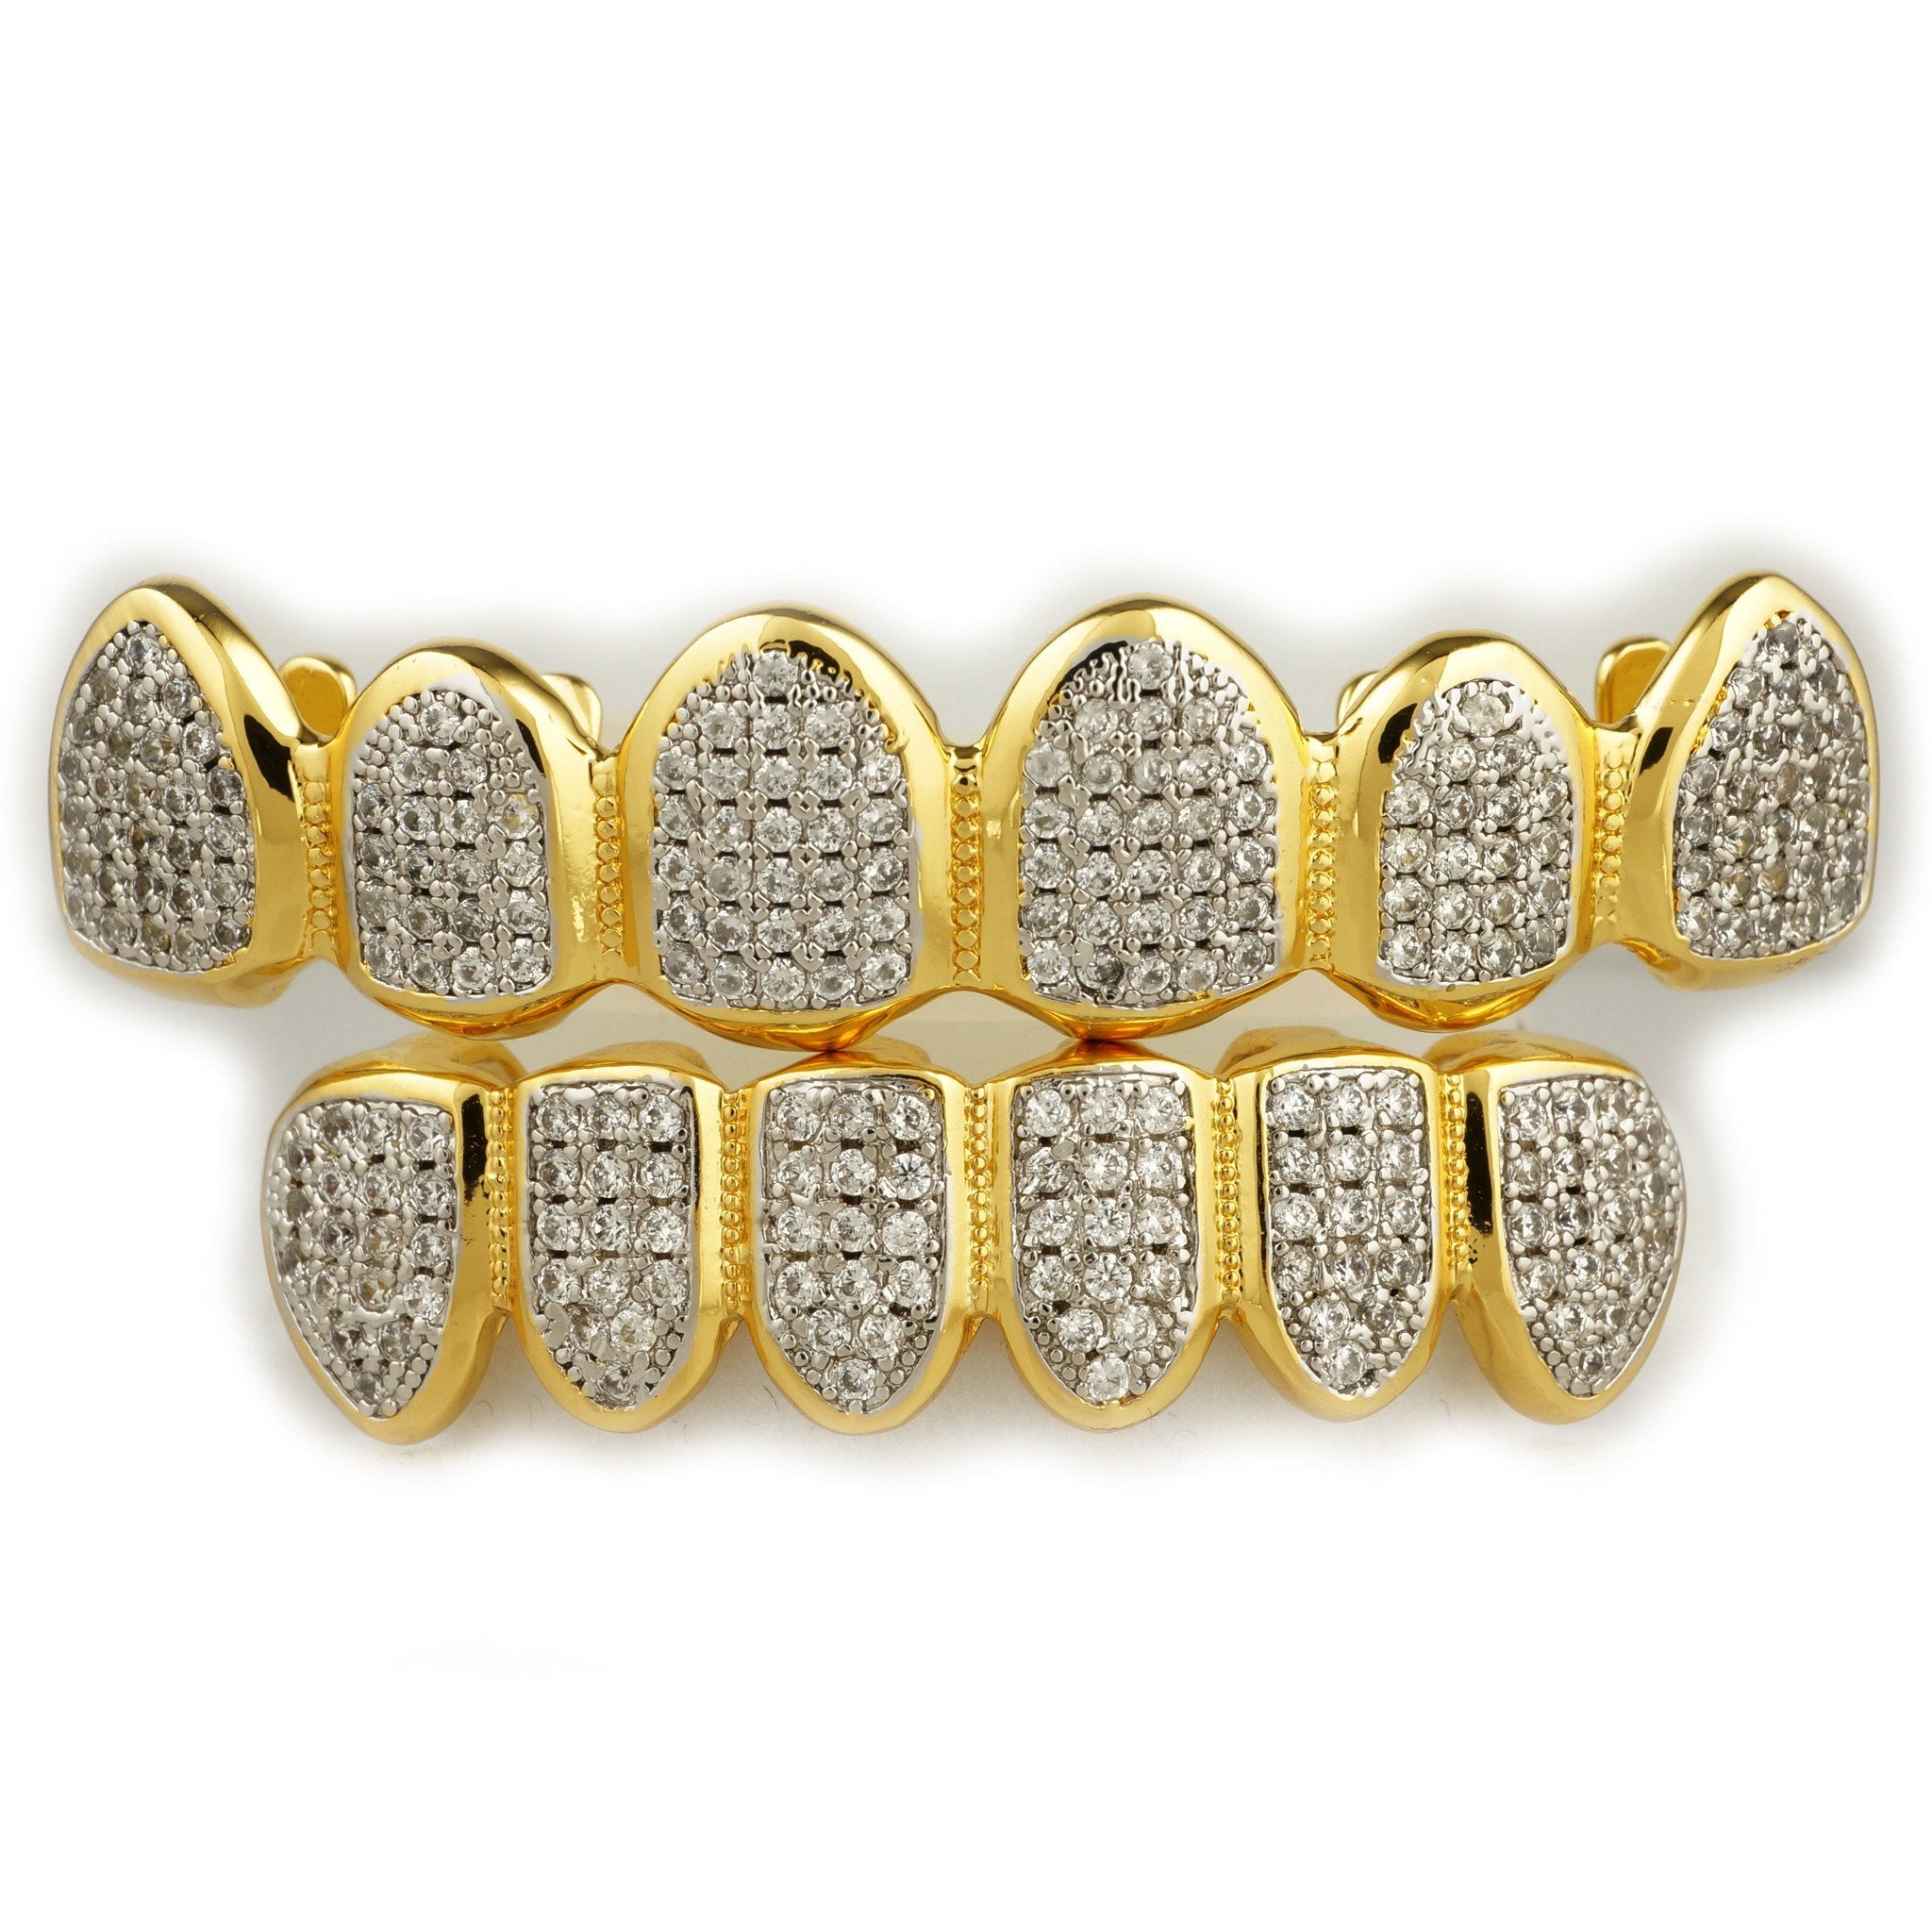 18k Gold Micro Pave Rhodium Prong Grillz